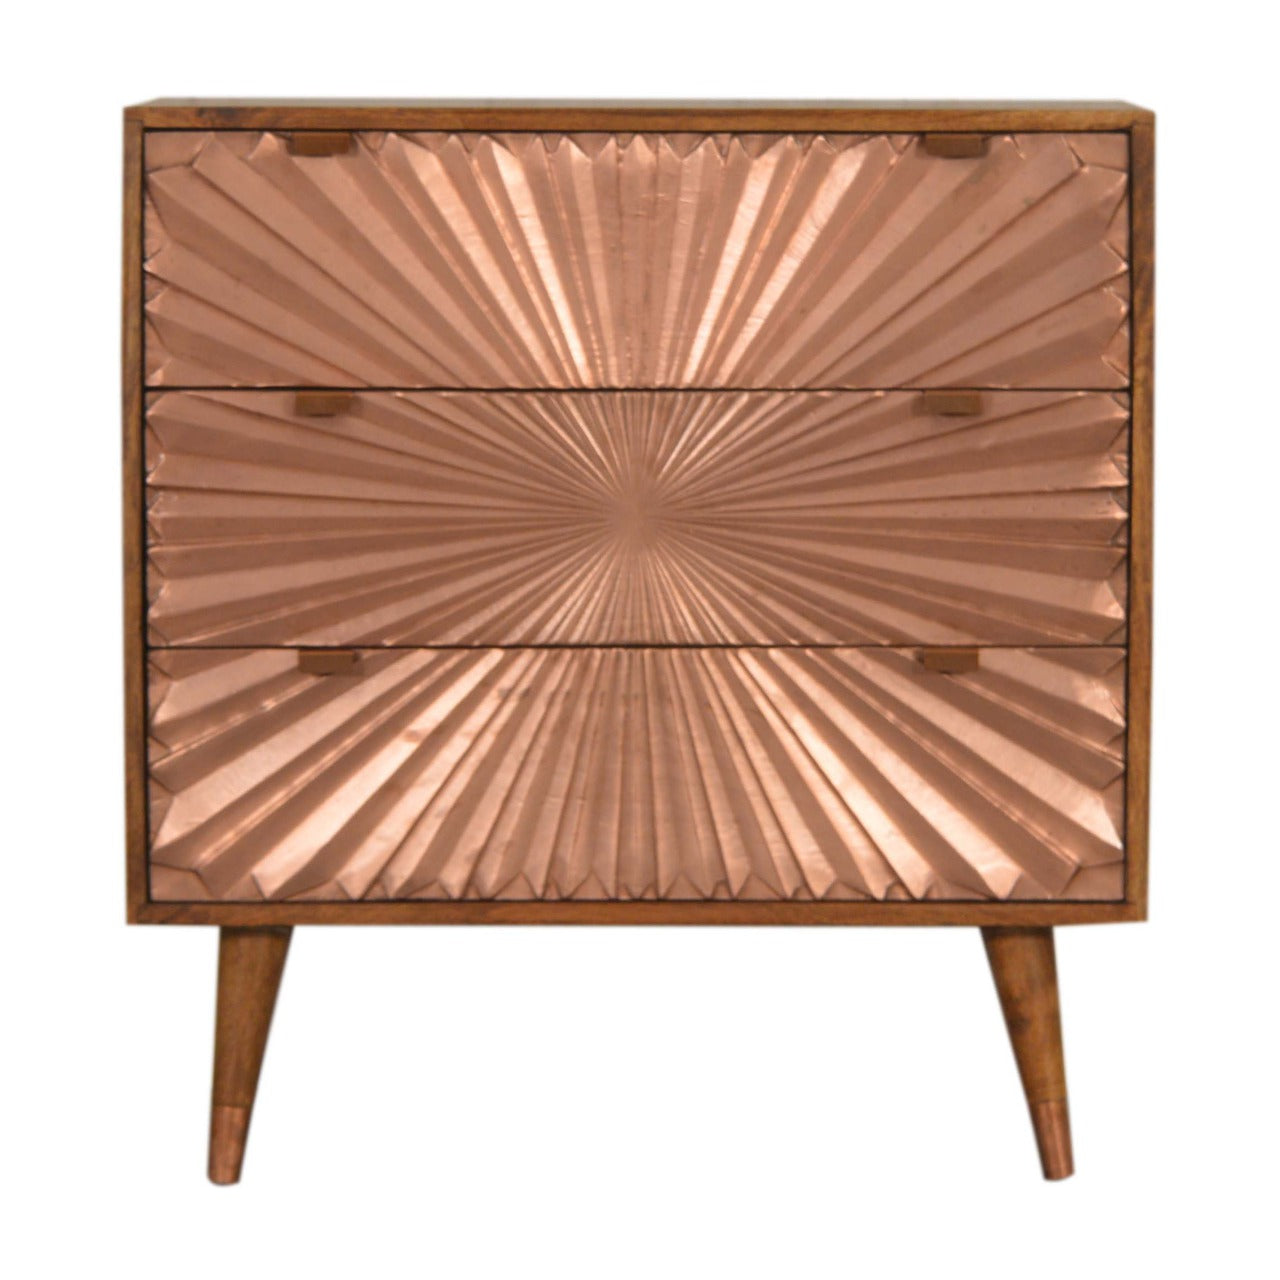 Manila Copper Solid Wood Chest